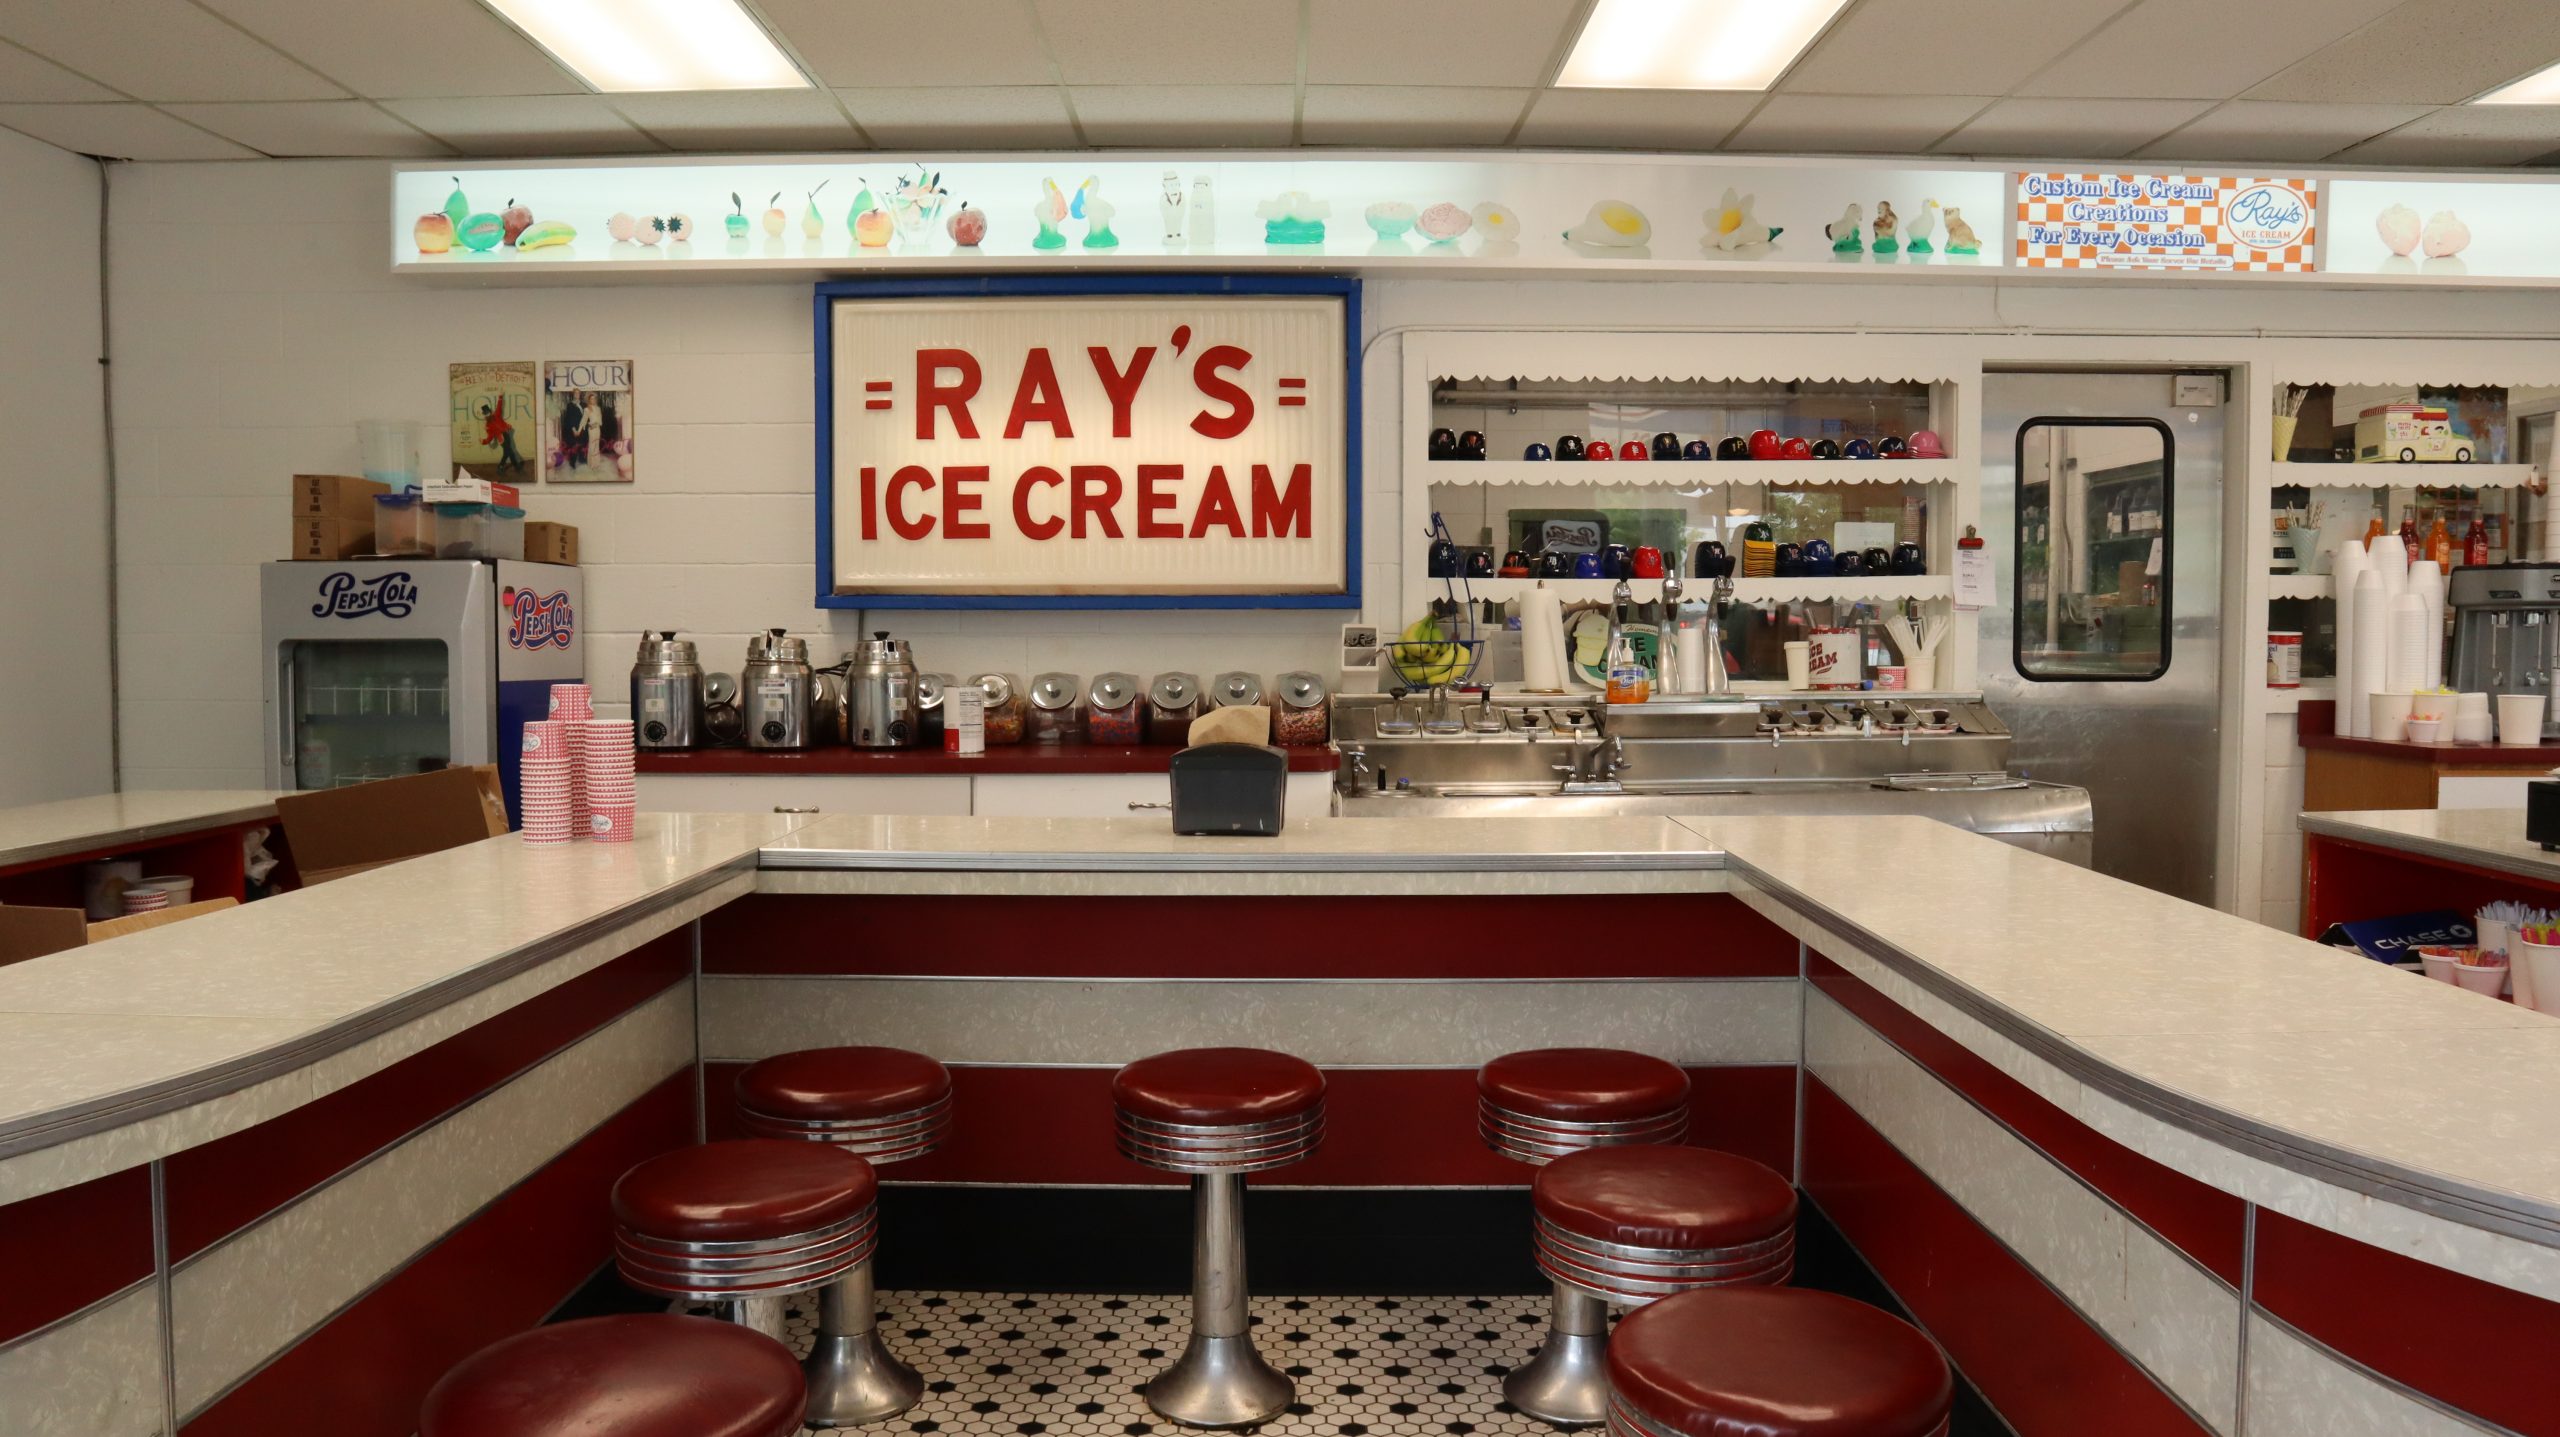 Interior of Ray's Ice Cream with 1950's-style red diner decor